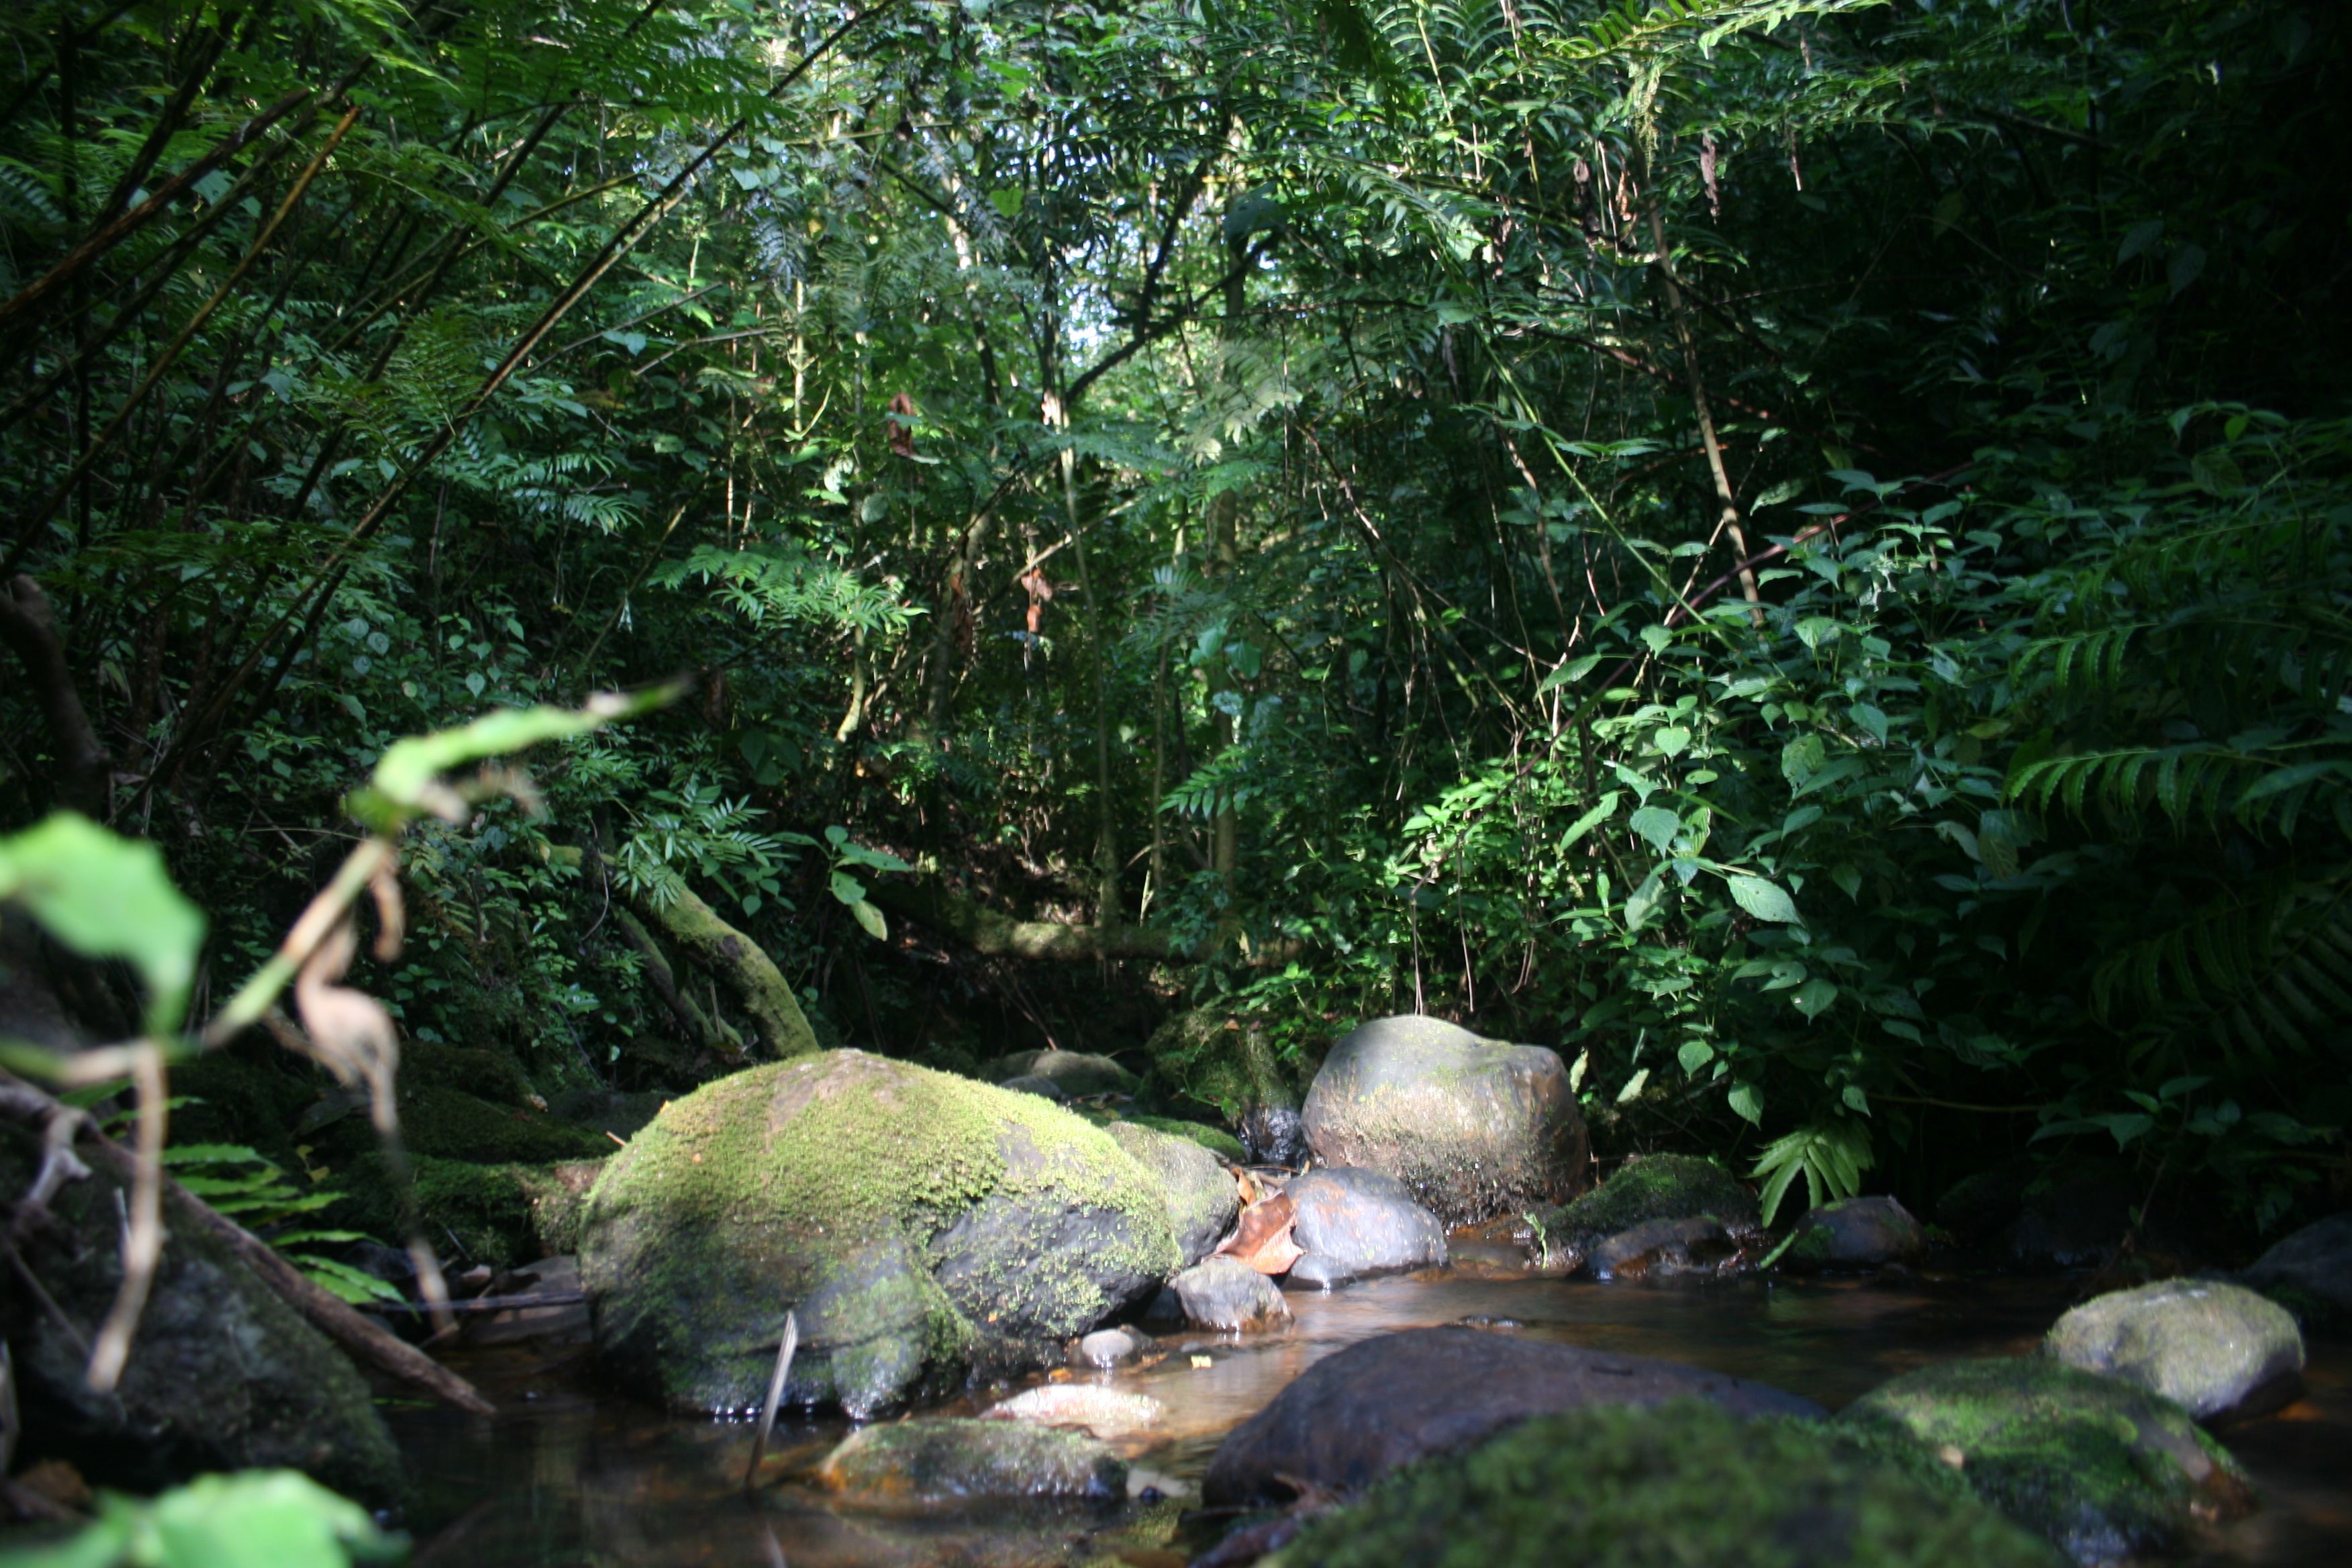 Mountain rainy forest in Cameroon - one of the places we do research